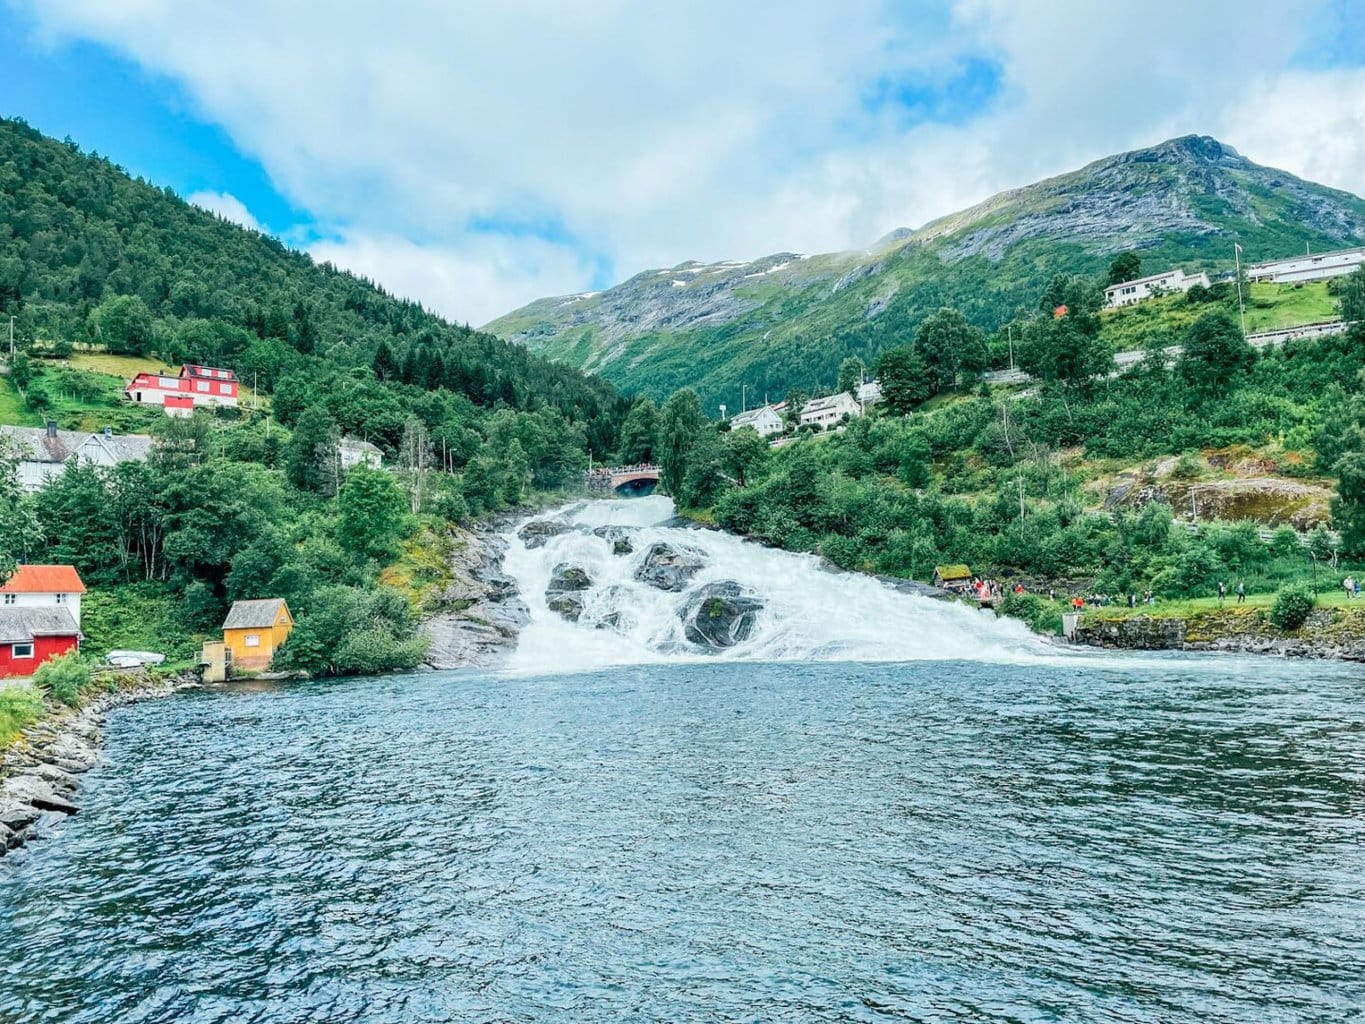 Credit Cruising For All, Ireland or Norway: Which Country in Northern Europe Should You Visit?